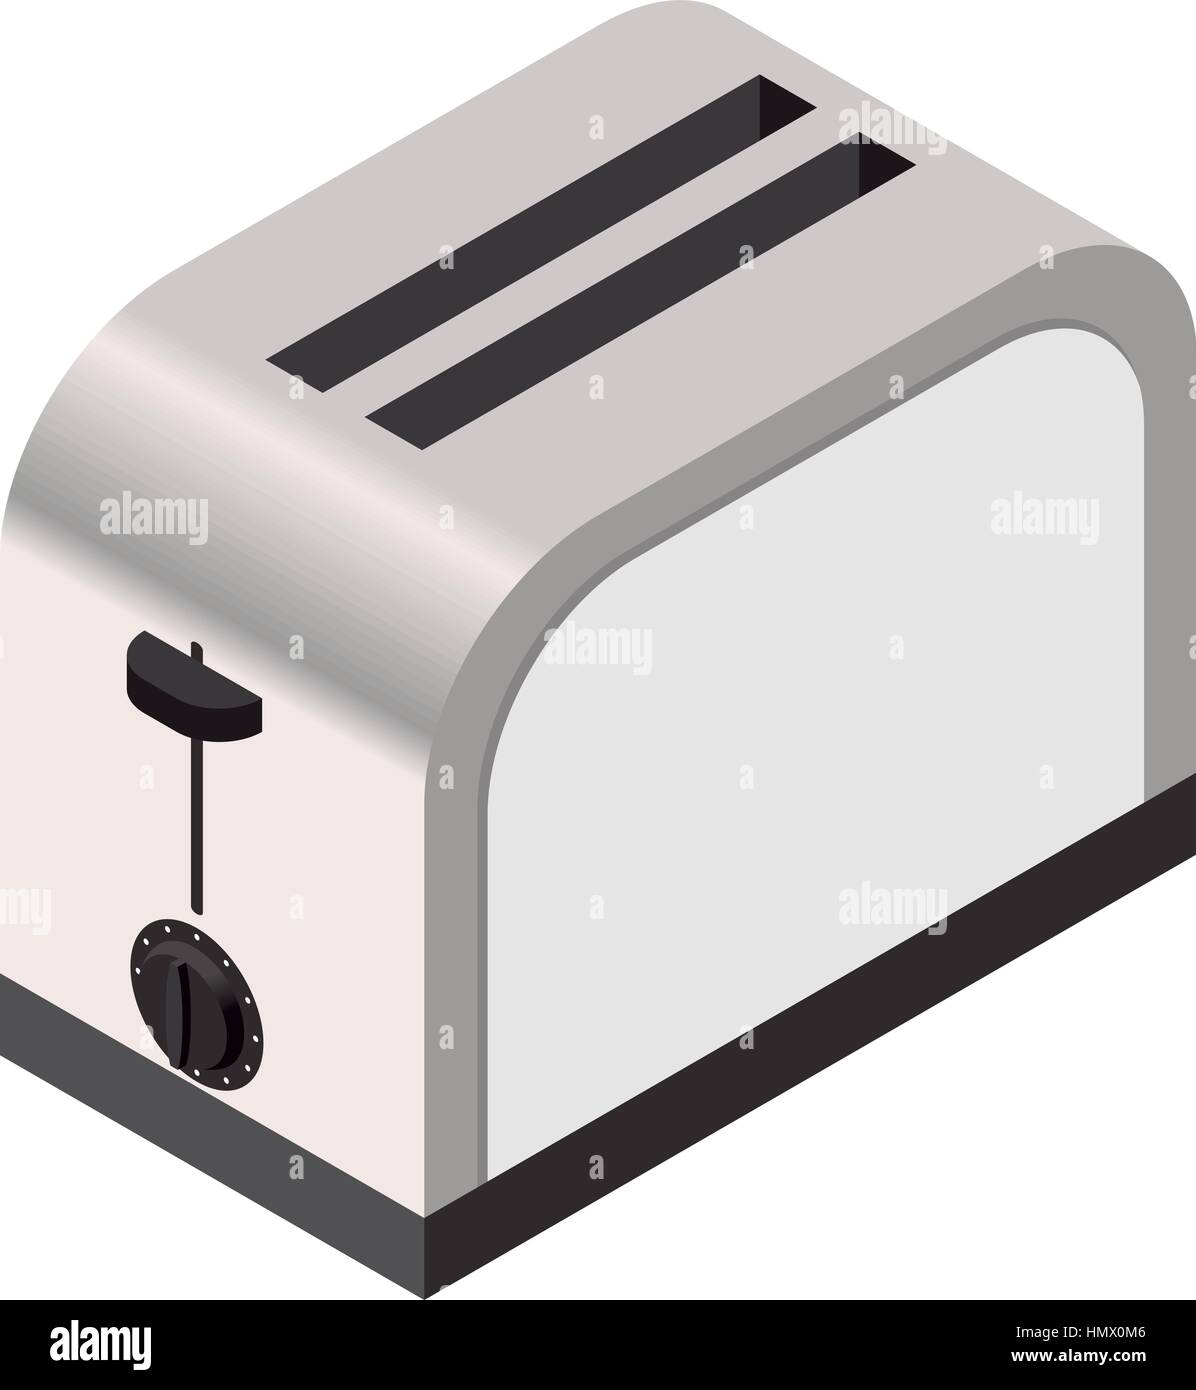 Vector image of the Isometric icon of a toaster Stock Vector